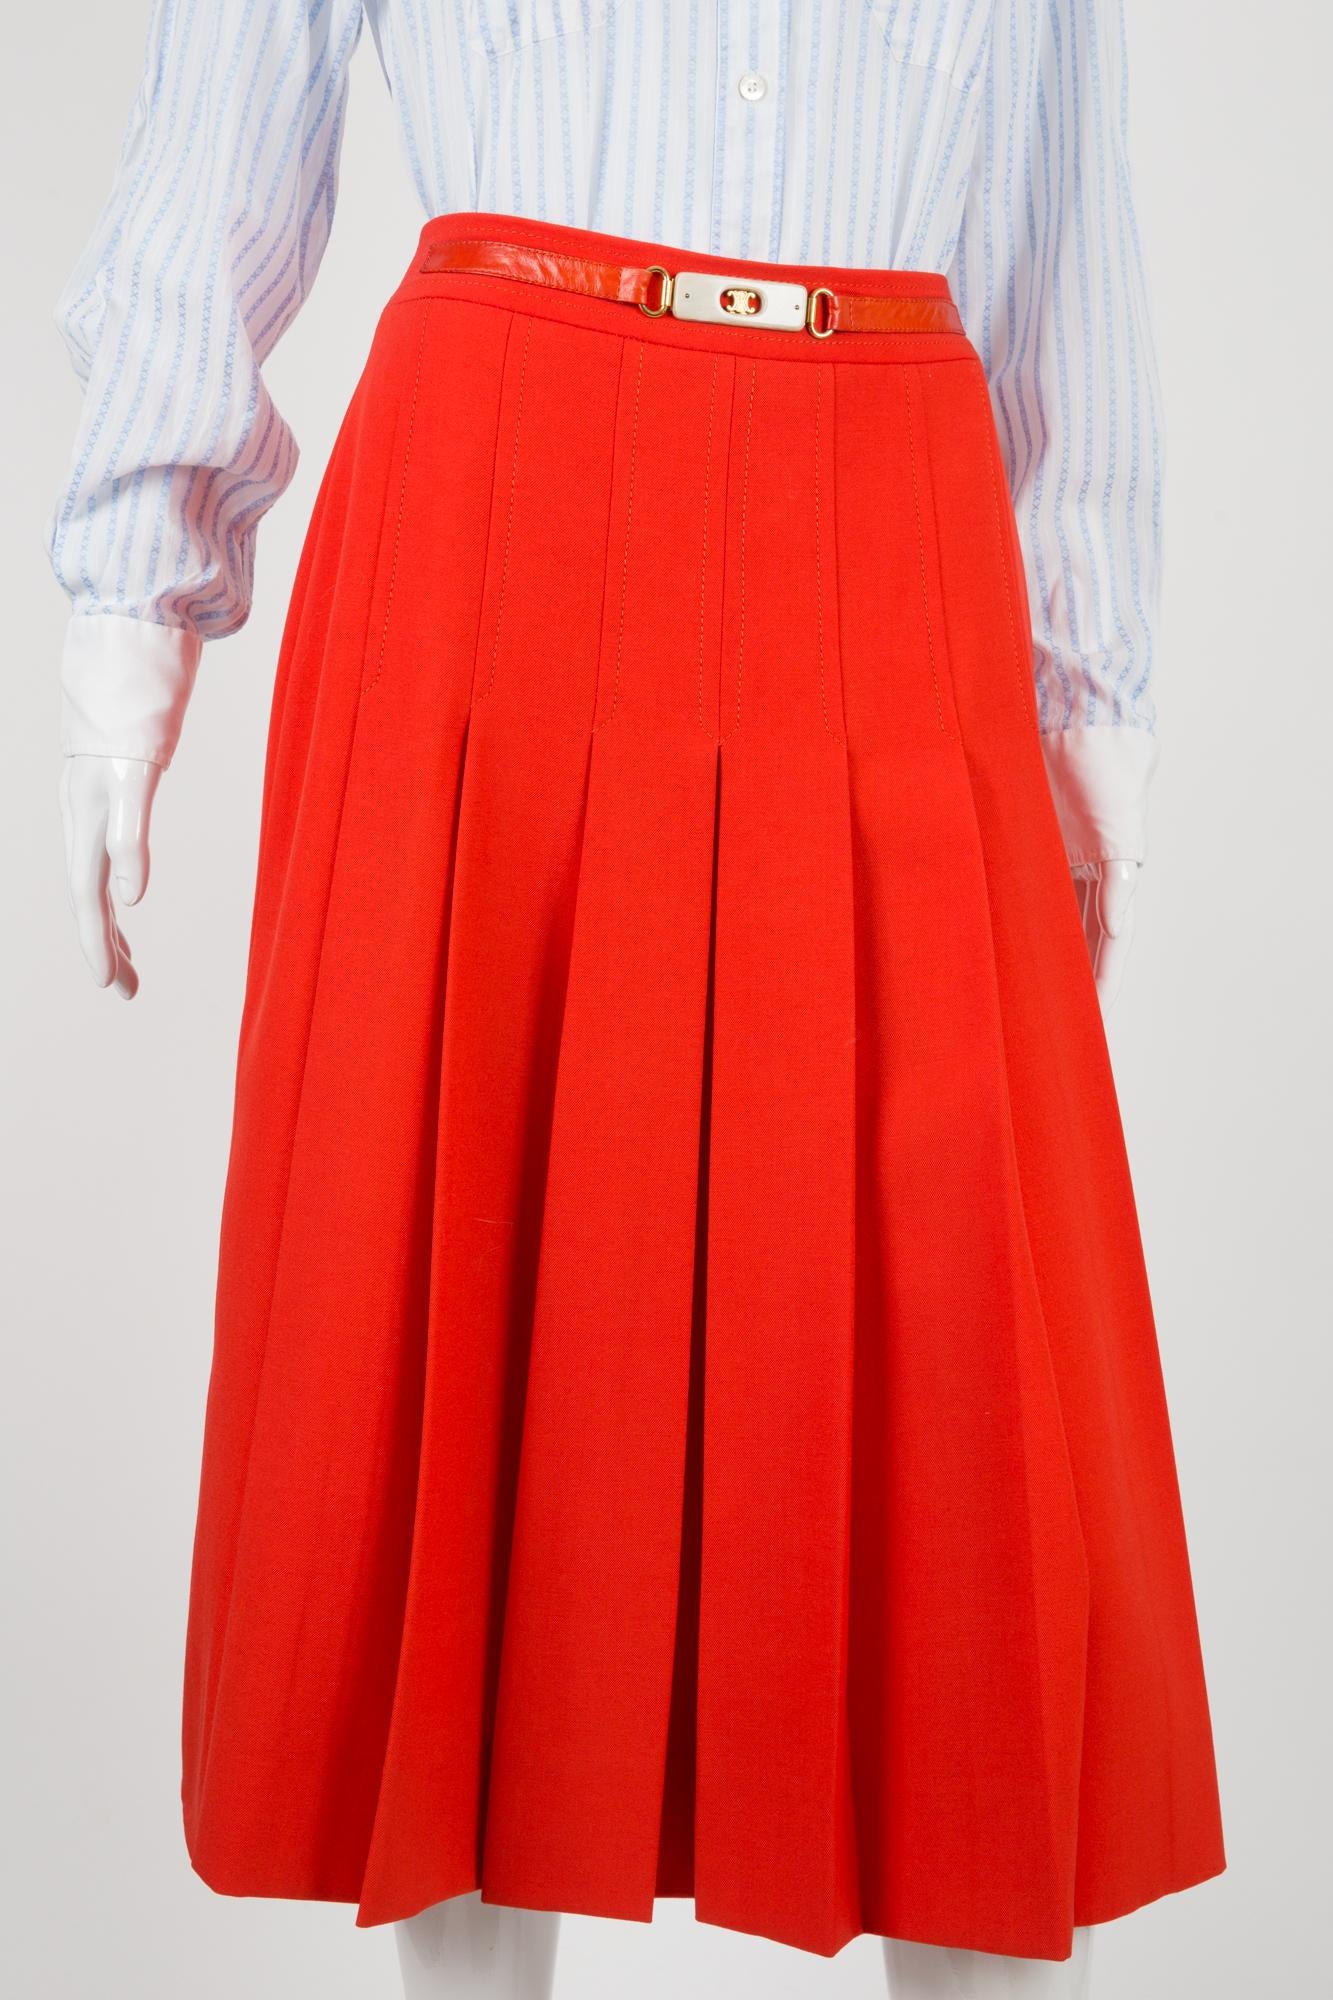 1970s Celine iconic red wool skirt featuring a front logo gold tone chain, a center back zip opening, a logo lining, front pleats. 
100% wool
Estimated size 36fr/ US4/ UK8
We guarantee you will receive this gorgeous item as described and showed on